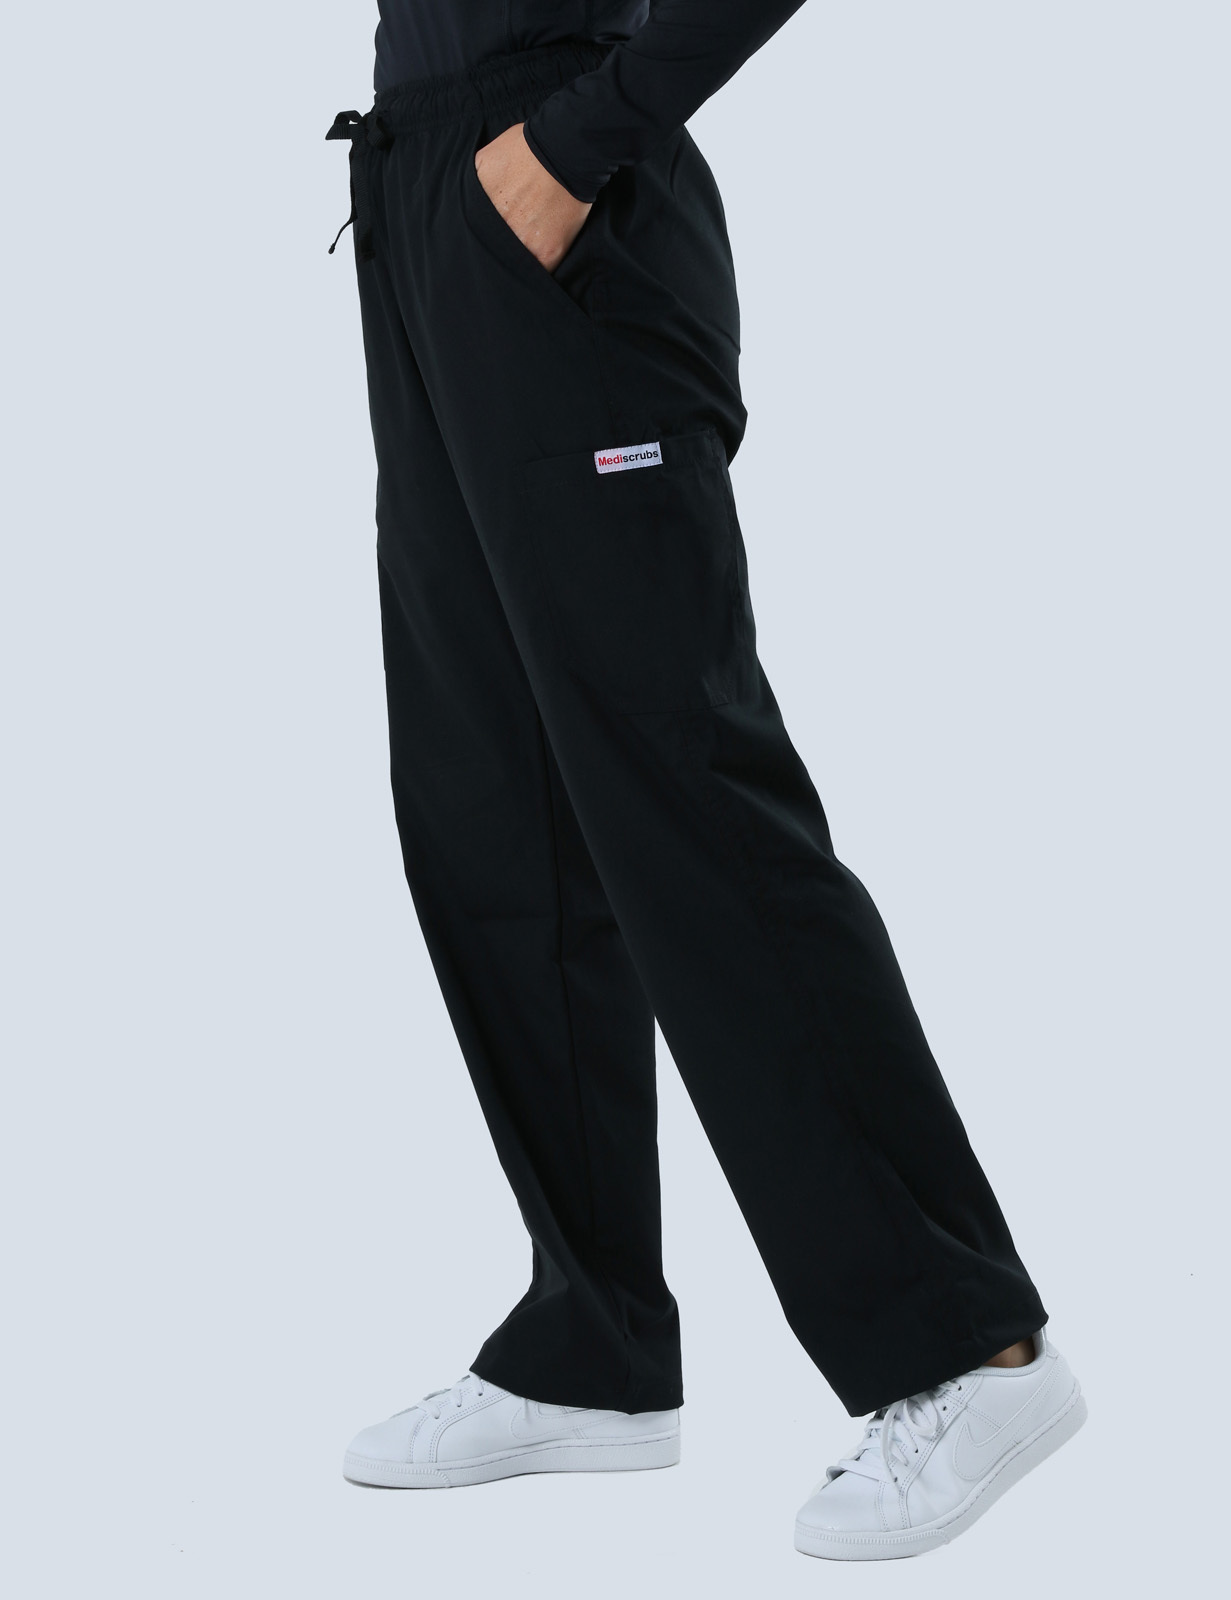 RBWH - Grantley Stable Neonatal (Women's Fit Spandex Scrub Top and Cargo Pants in Black incl Logos)